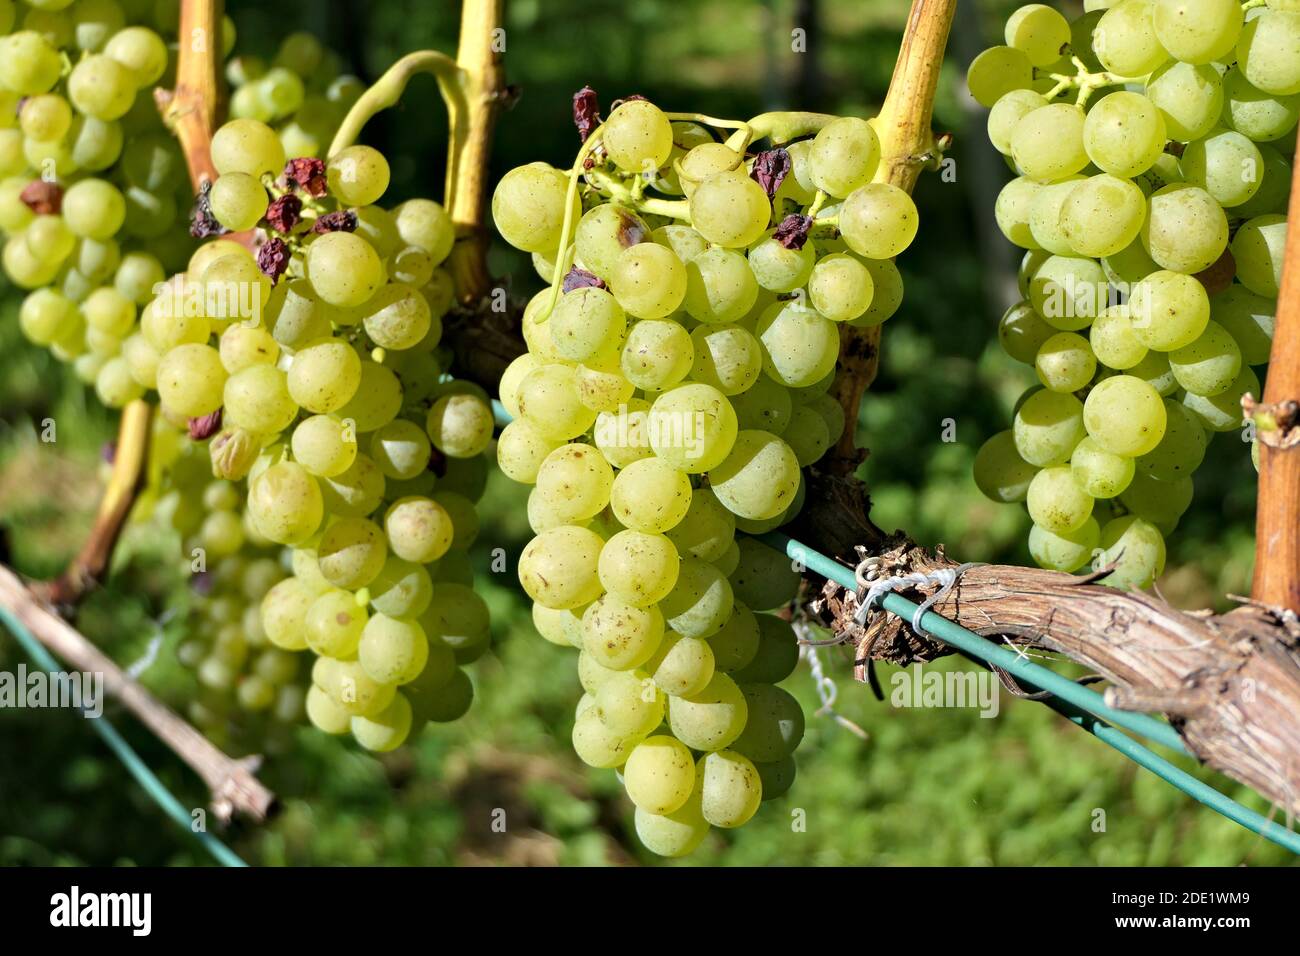 Ready for harvest - closeup bunch of ripe juicy green grapes Stock Photo